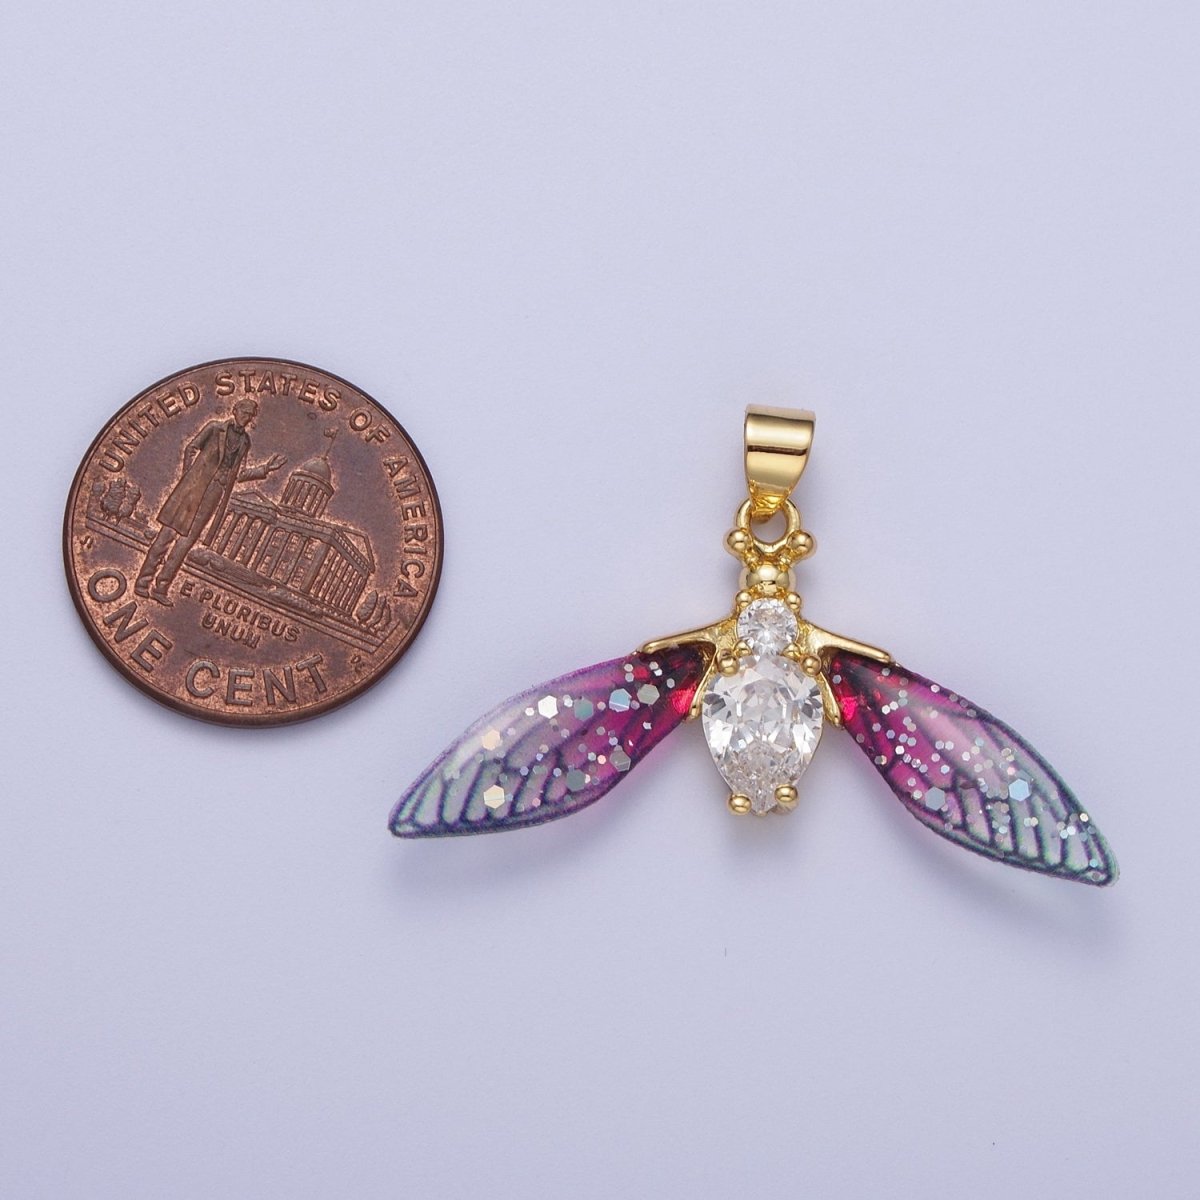 14K Gold Filled Blue / Fuchsia Fairy Wasps Cubic Zirconia Insect Pendant For Jewelry Making H-512 H-520 - DLUXCA